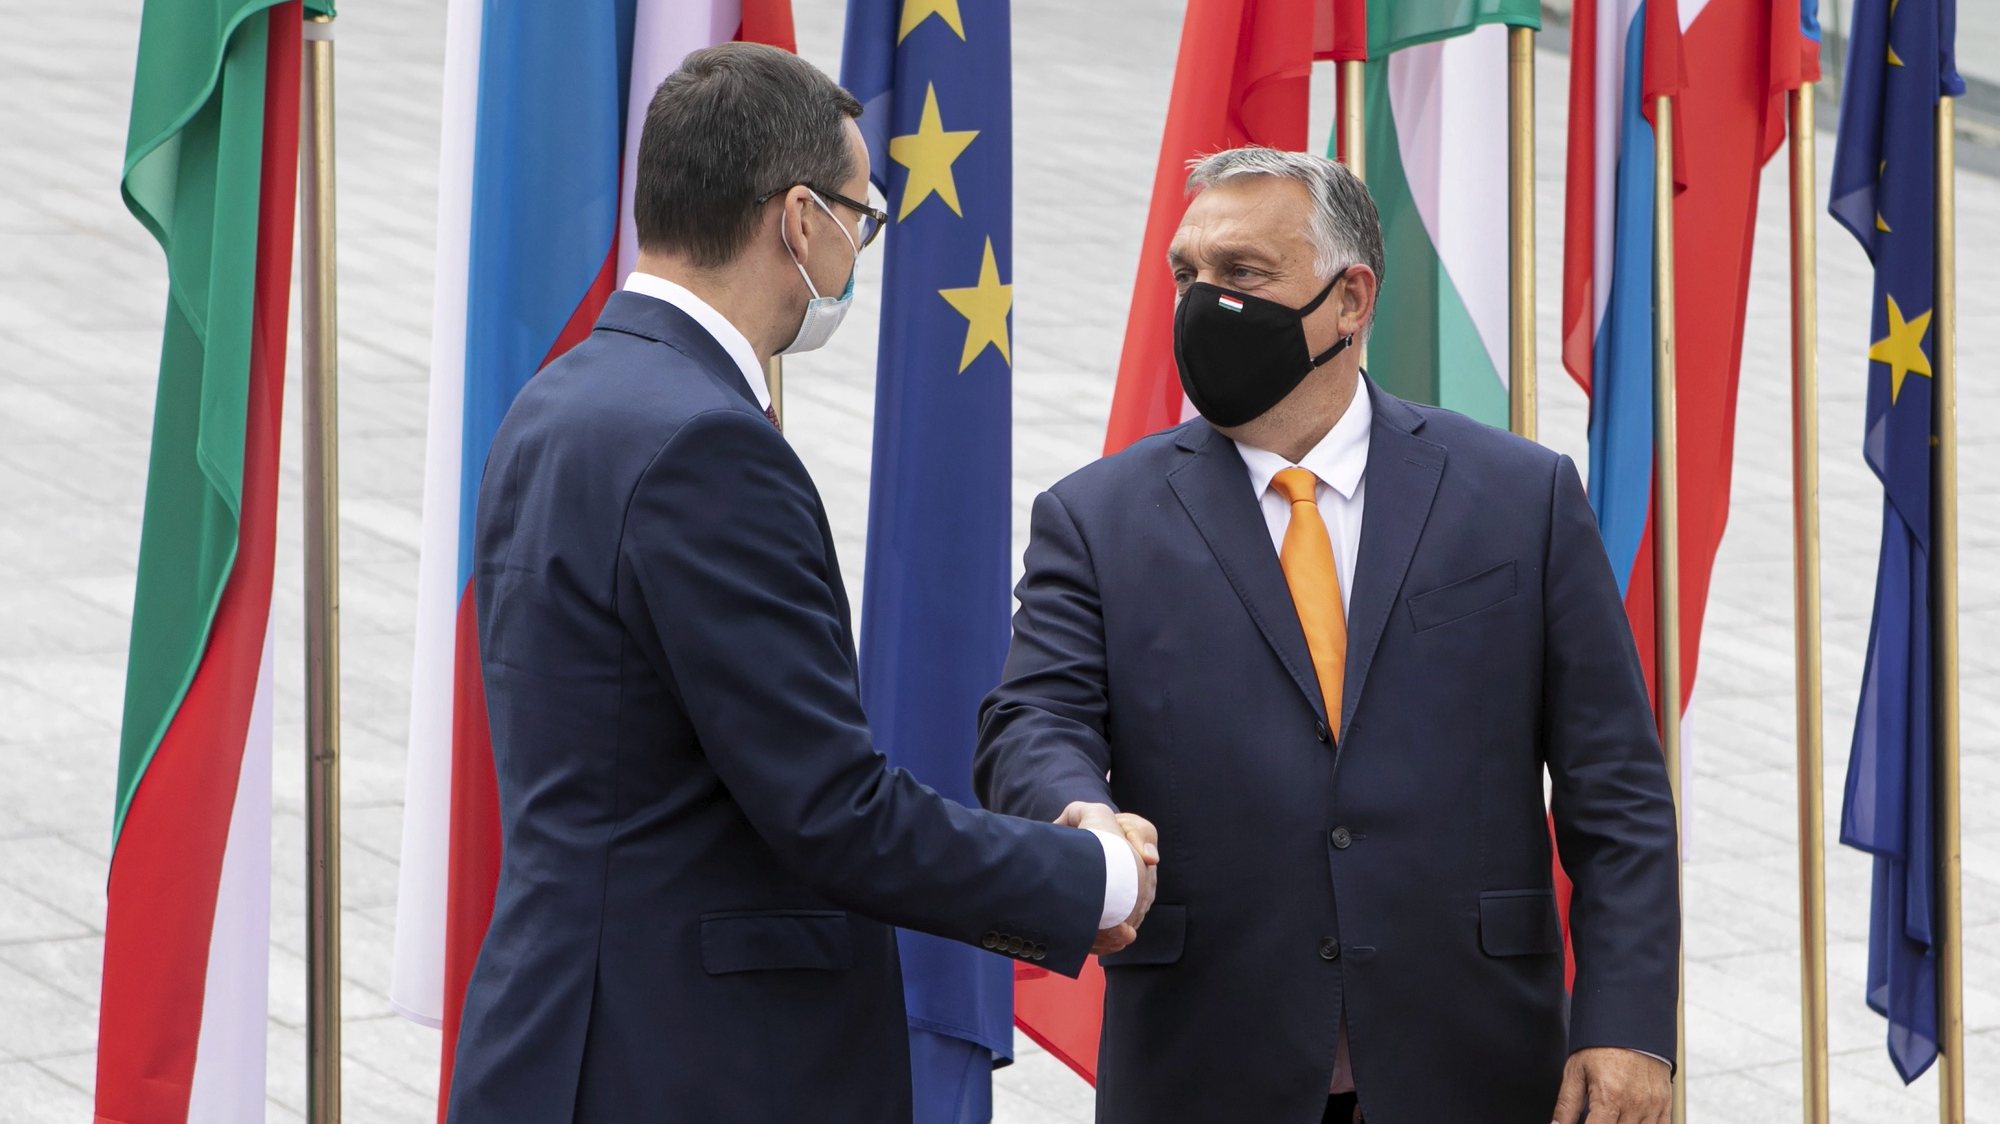 epa08661241 Polish Prime Minister Mateusz Morawiecki (L) and Hungarian Prime Minister Viktor Orban (R) during official welcome ceremony before the Visegrad Group prime ministers meeting in Lublin, eastern Poland, 11 September 2020. Visegrad Group PM&#039;s exchange opinions before the forthcoming extraordinary EU summit and will speak about the situation in Belarus and Russia, as well as about the fight against COVID-19.  EPA/JACEK SZYDLOWSKI POLAND OUT